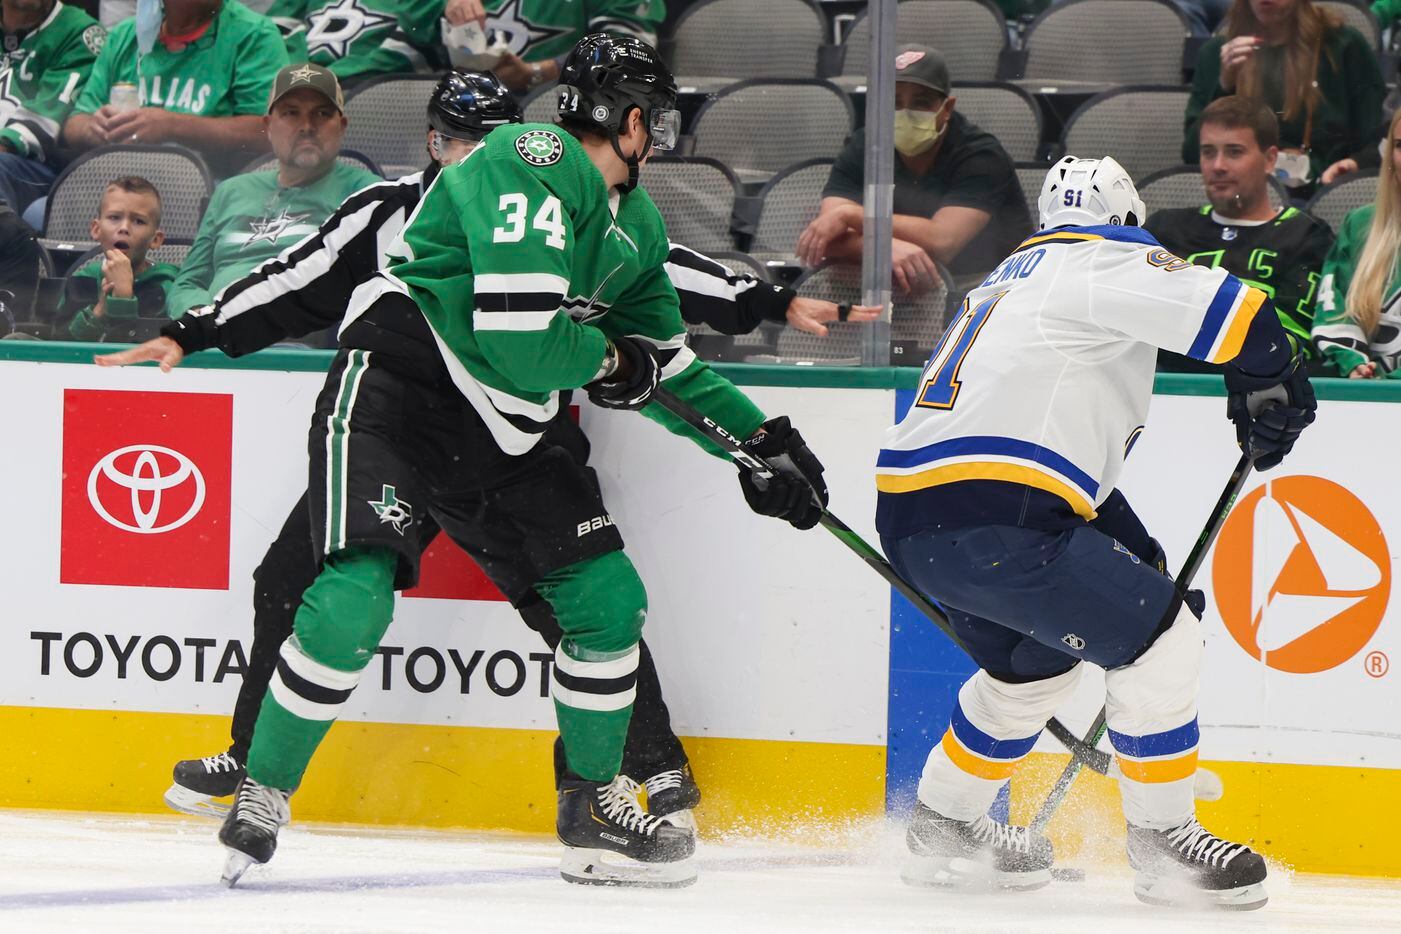 Dallas Stars right wing Denis Gurianov (34) battles St. Louis Blues right wing Vladimir Tarasenko (91) for the puck during the first period of a Dallas Stars preseason game against St. Louis Blues on Tuesday, Oct. 5, 2021, at American Airlines Center in Dallas. (Juan Figueroa/The Dallas Morning News)